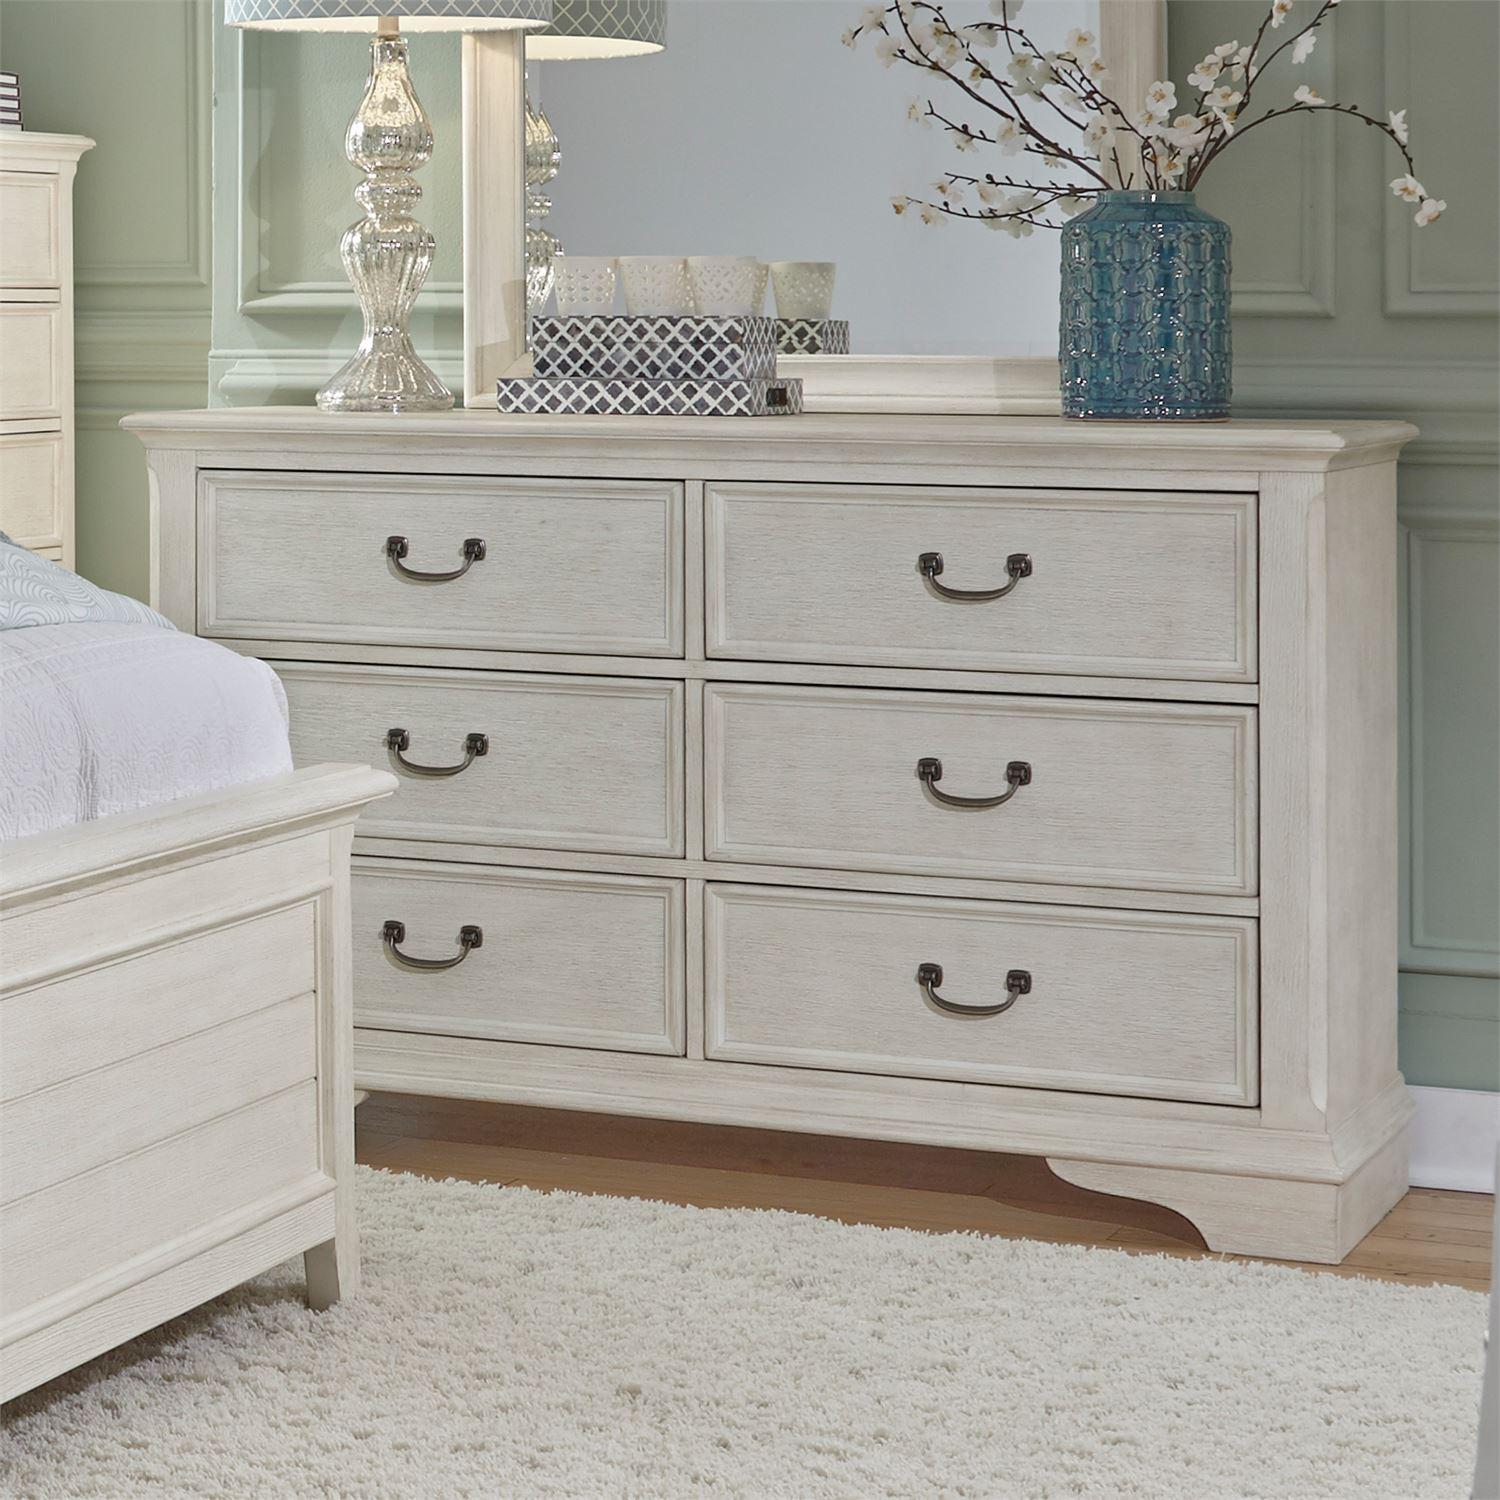 Transitional Double Dresser Bayside  249-BR30 249-BR30 in White 